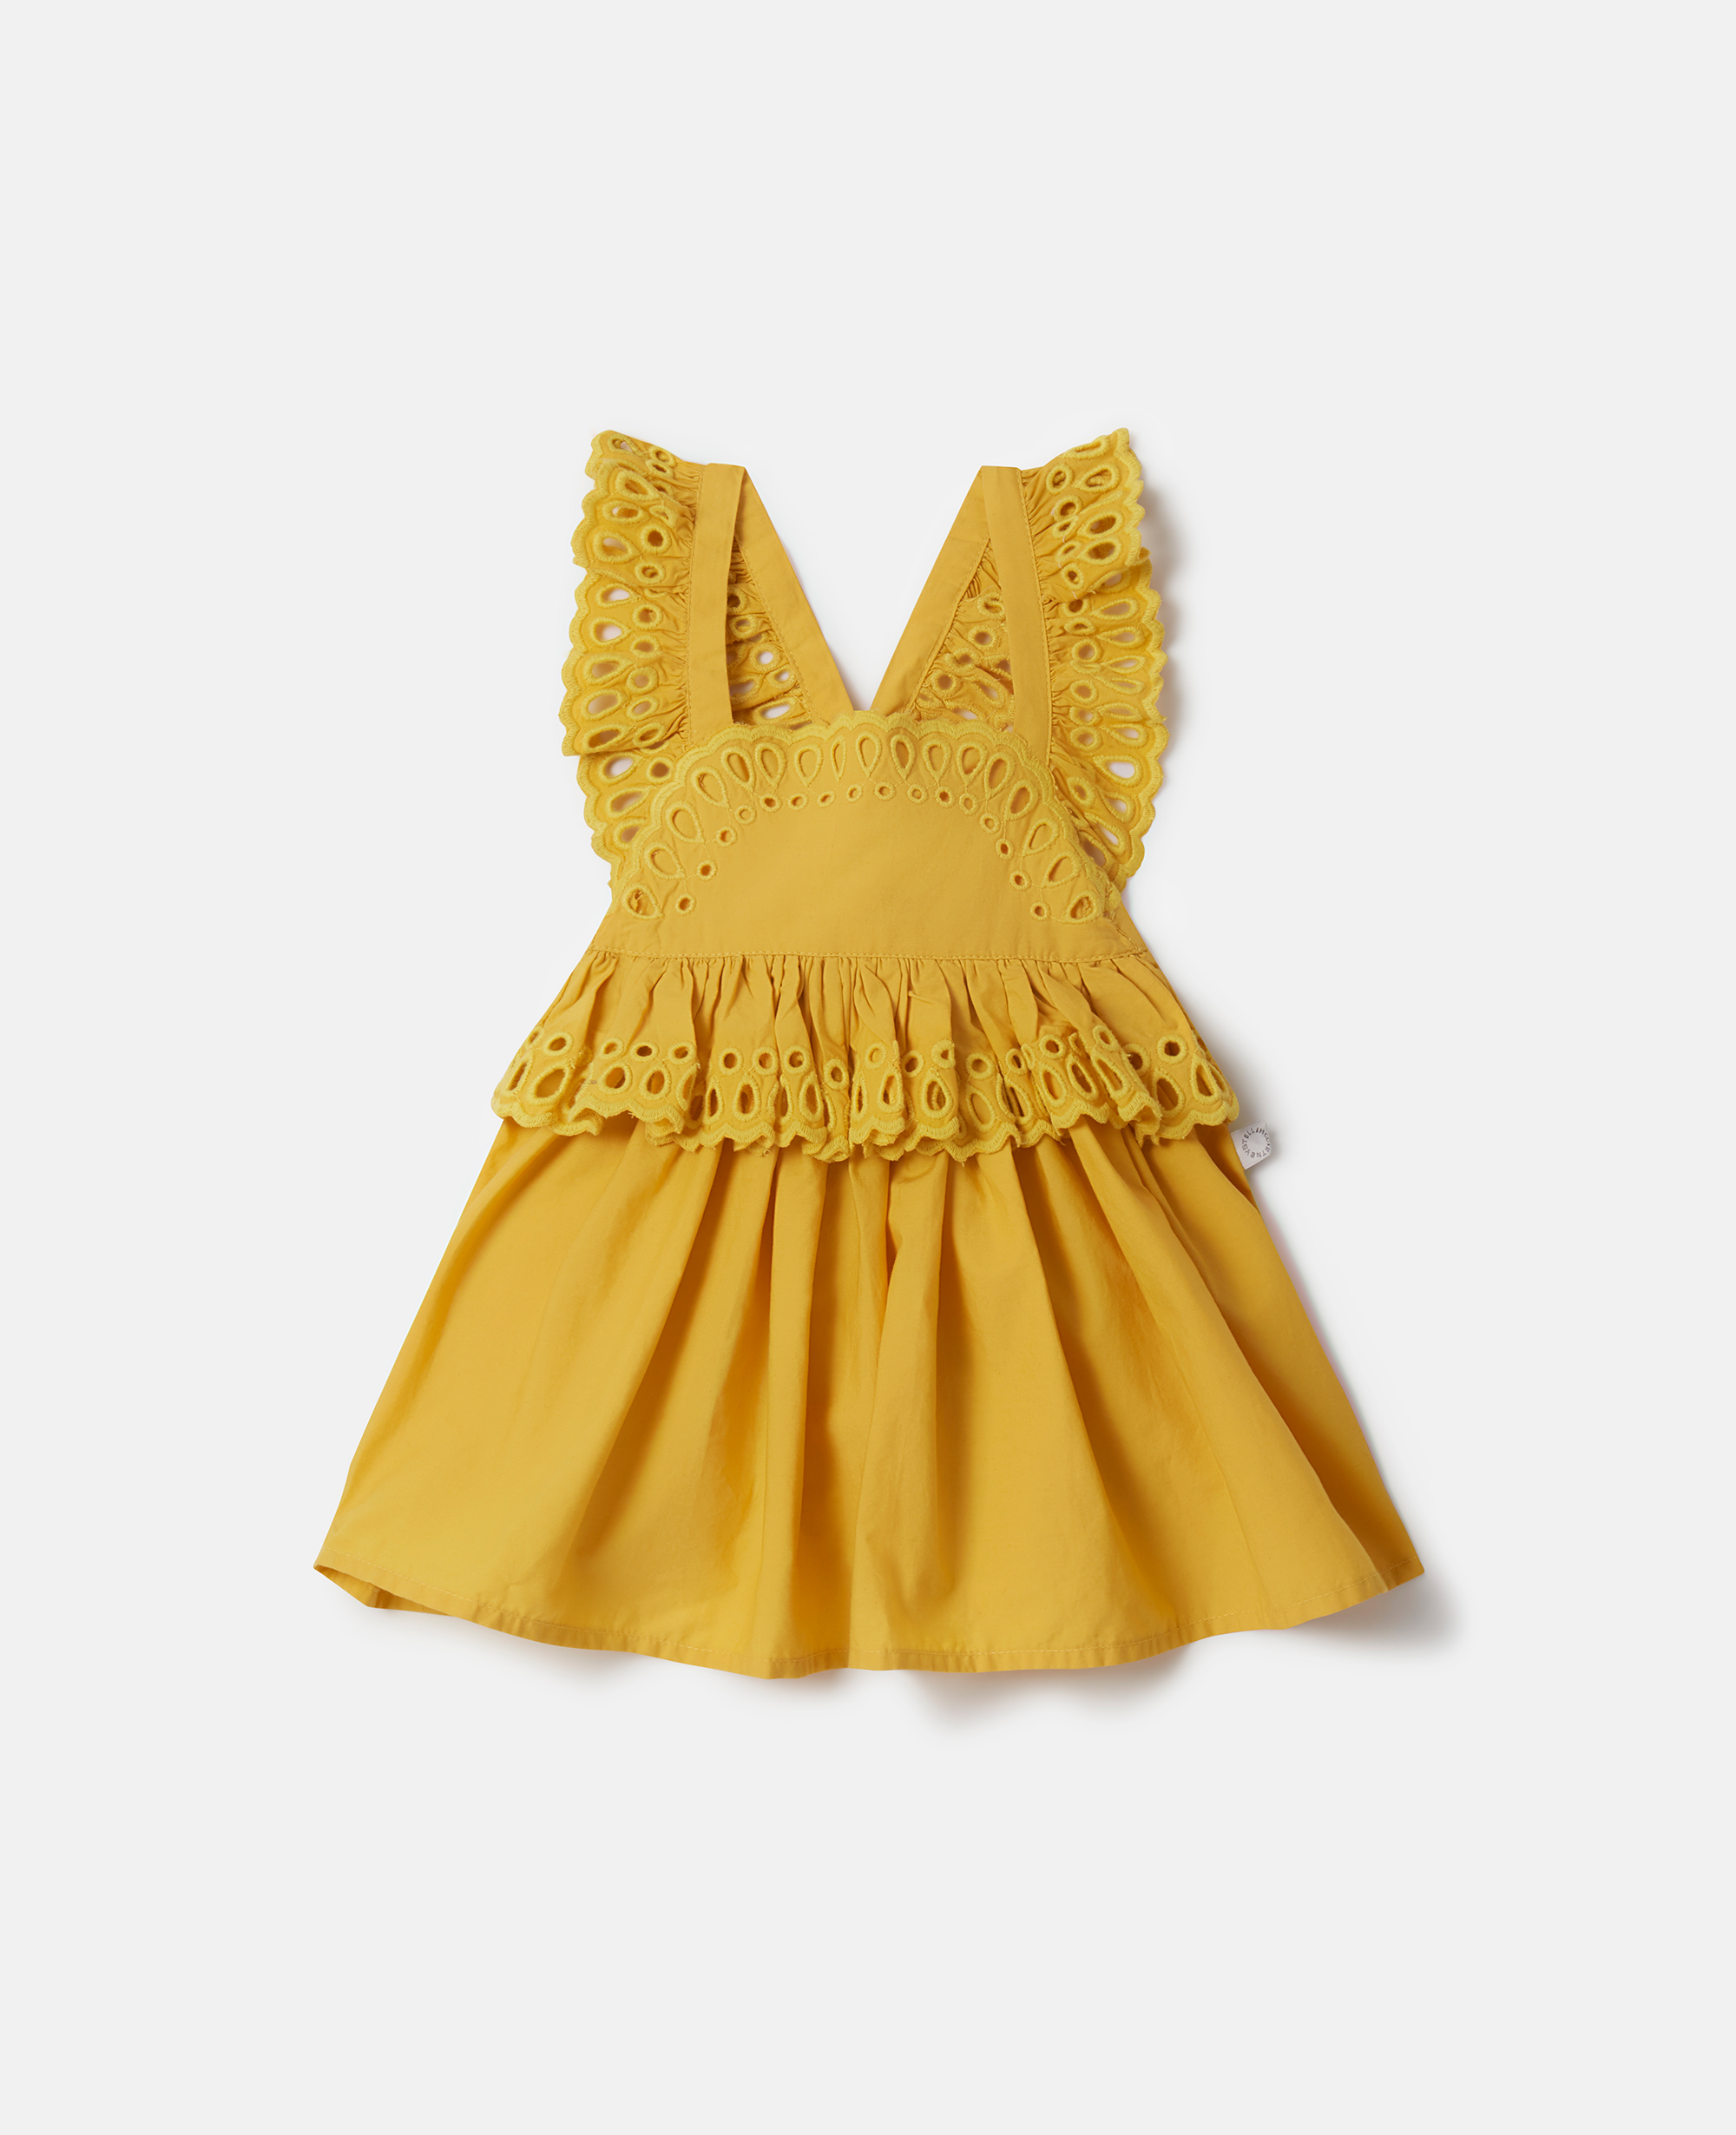 stella mccartney - robe chasuble à broderie anglaise, femme, jaune, taille: 3m